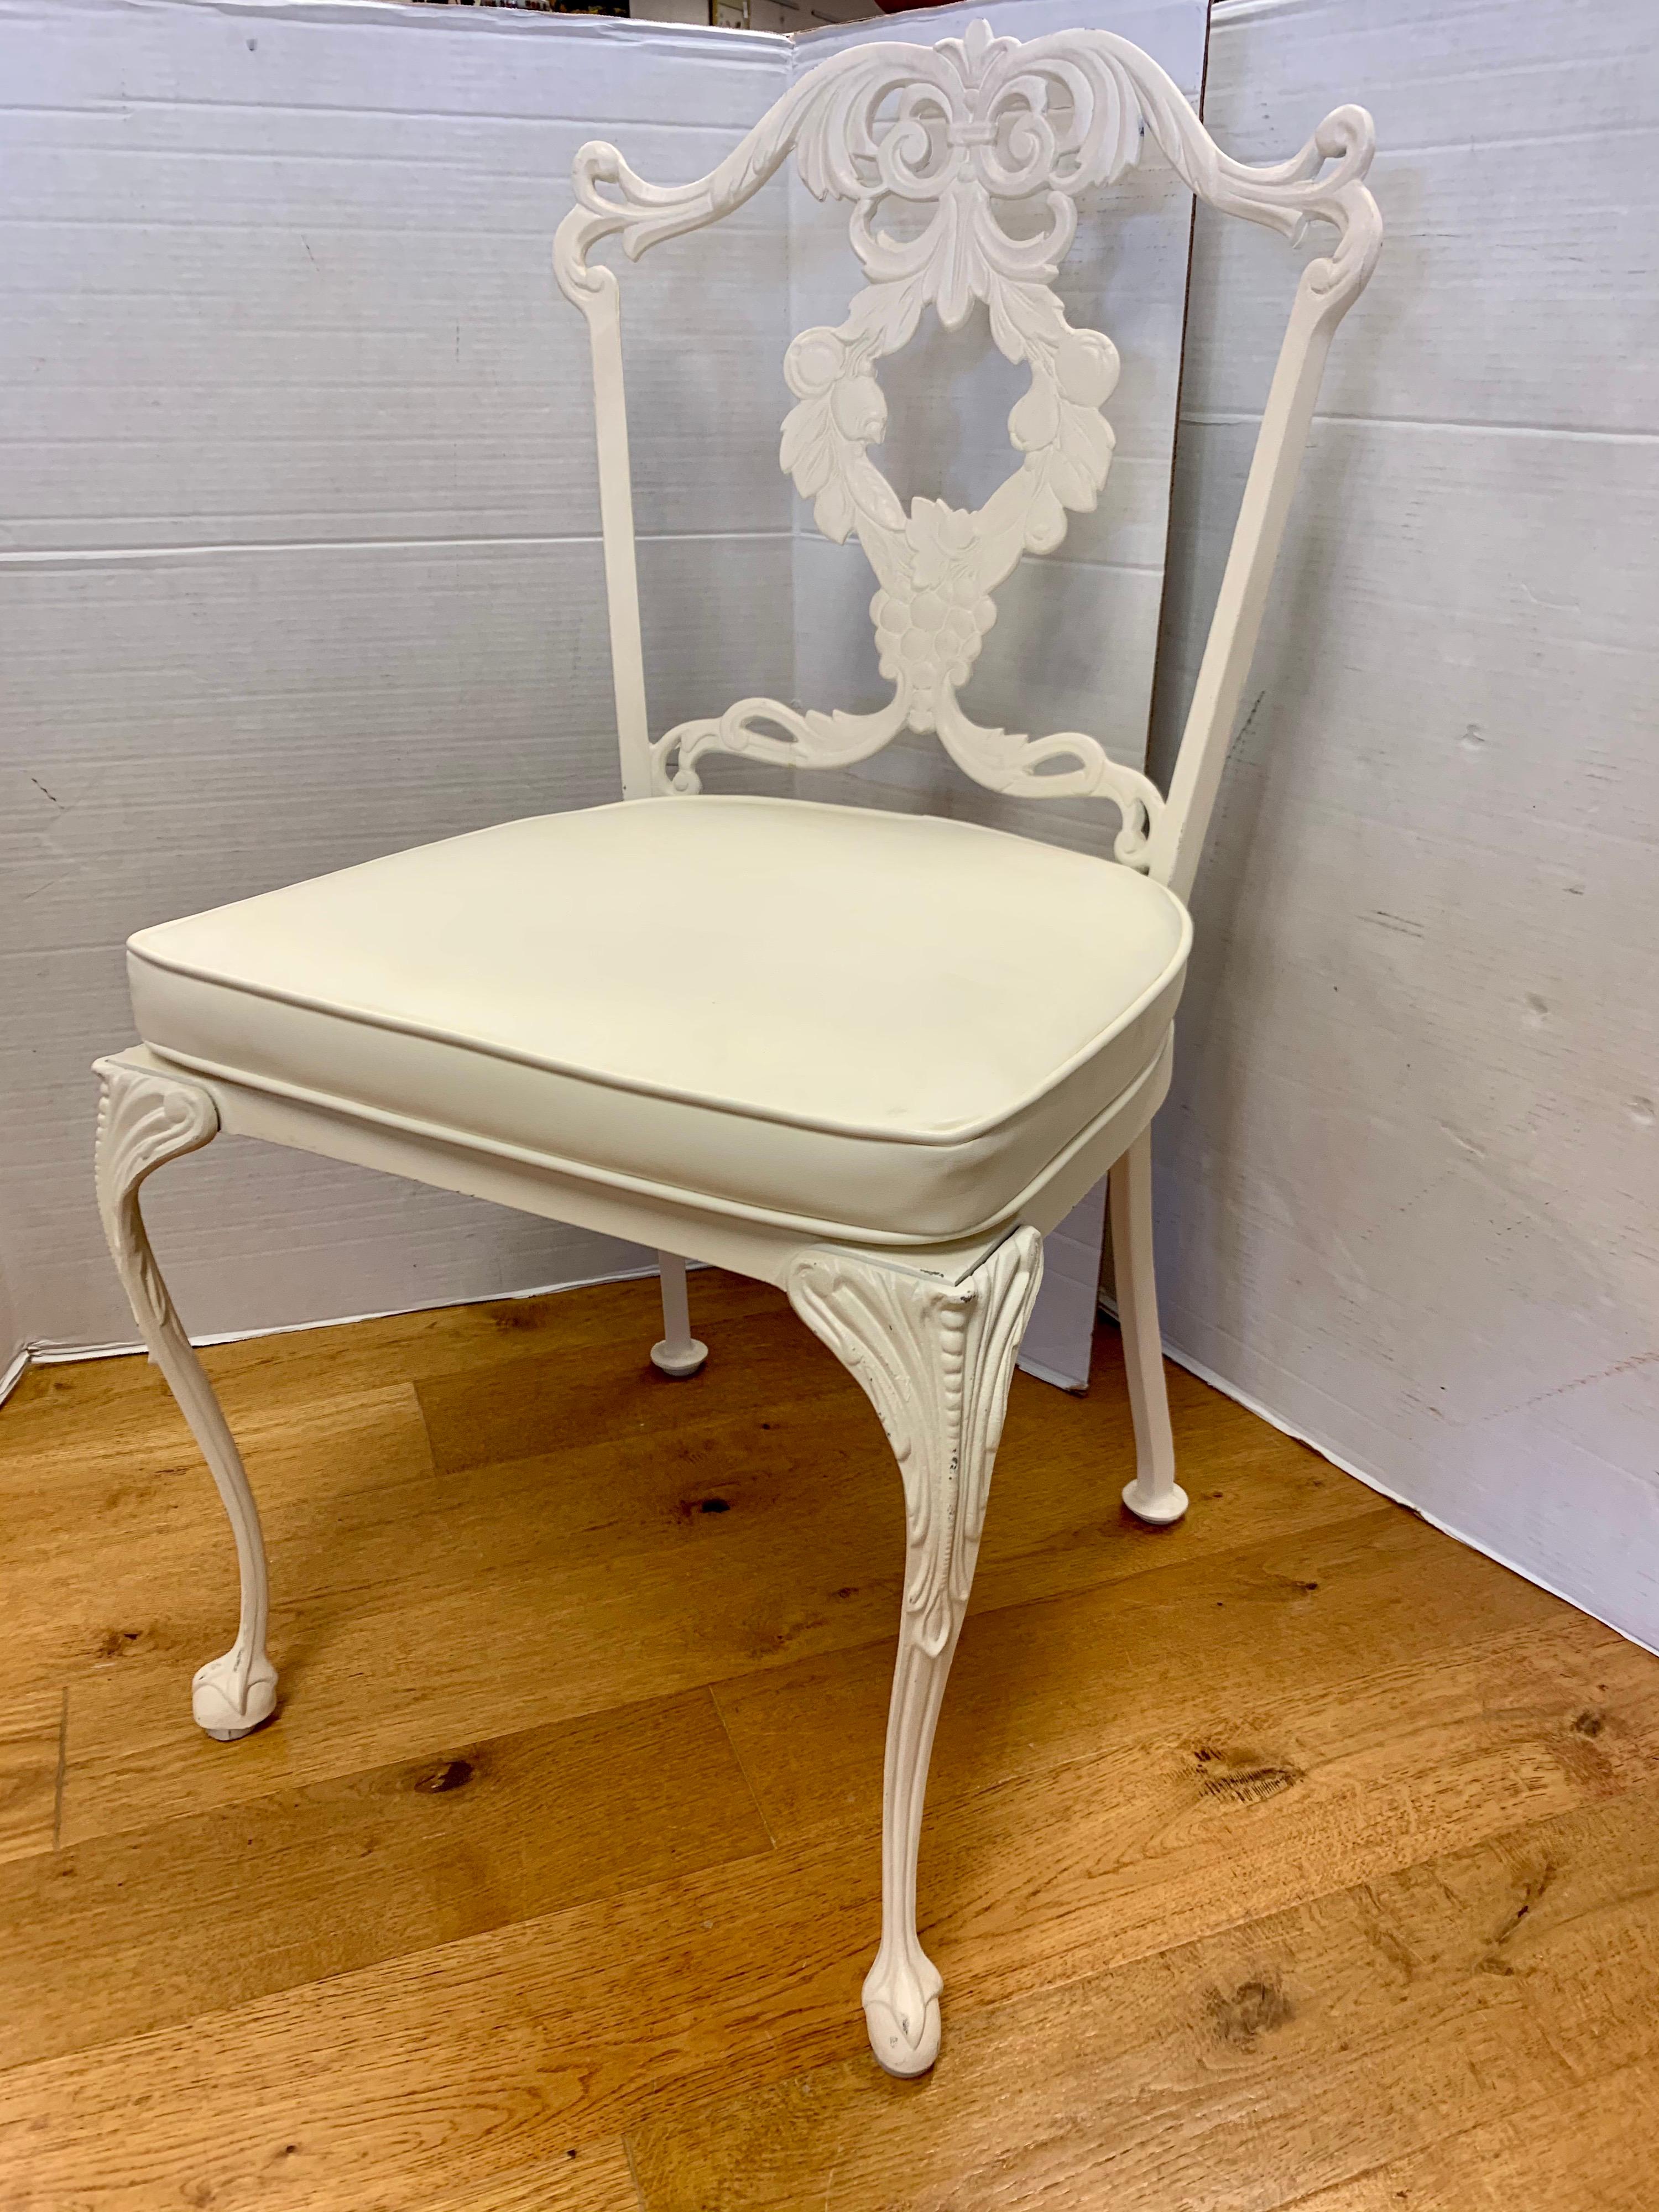 Set of six cast aluminum and white enameled French regency style dining chairs. Fresh white enamel over finely cast aluminum for which Molla was renowned. Ultra rare. Now, more than ever, home is where the heart is.